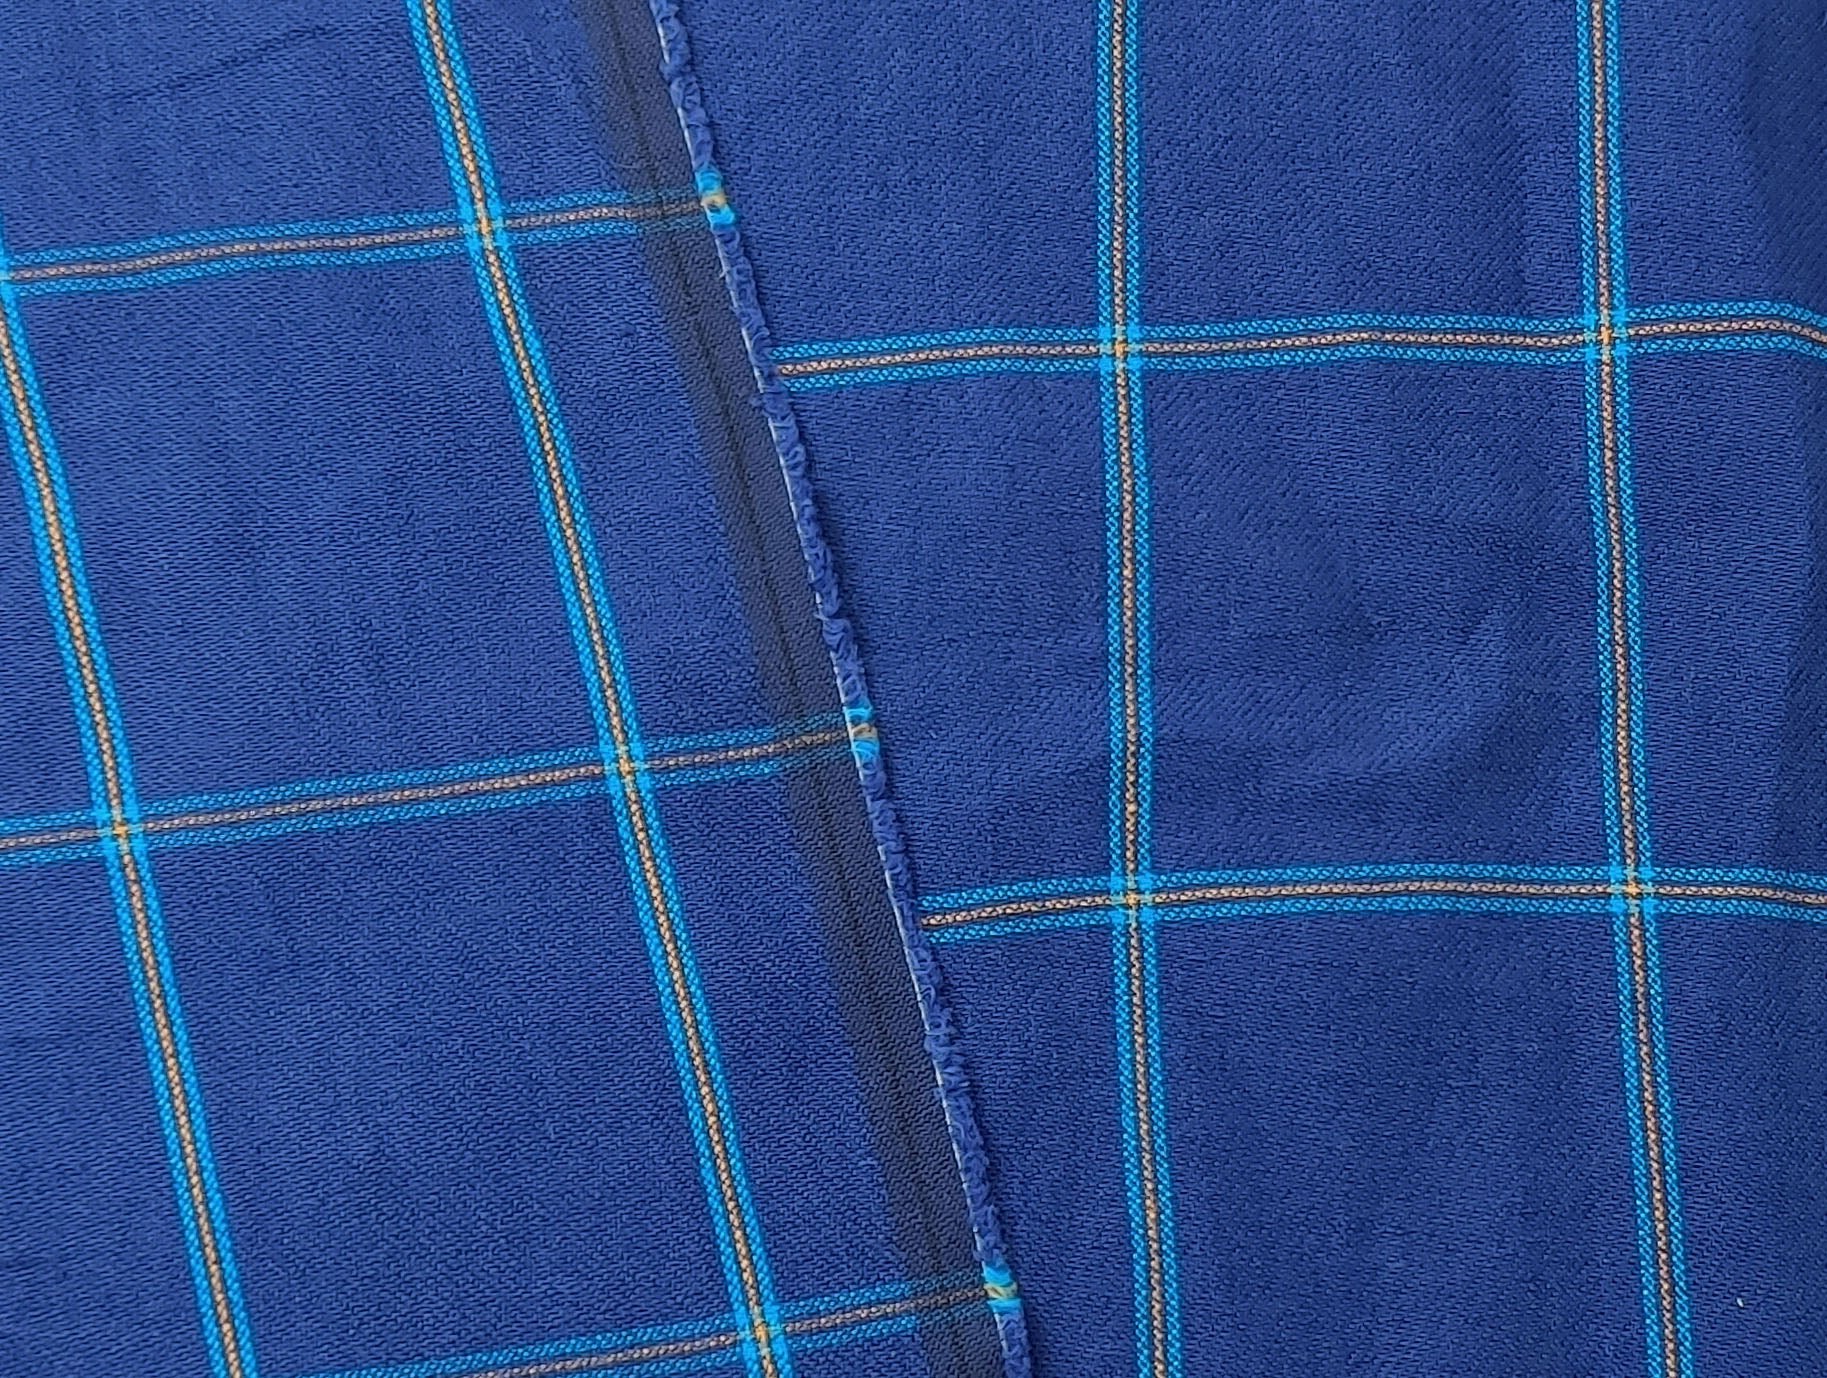 Navy Color 100% Linen Dobby Weave in Windowpane Check 7850 - The Linen Lab - Navy